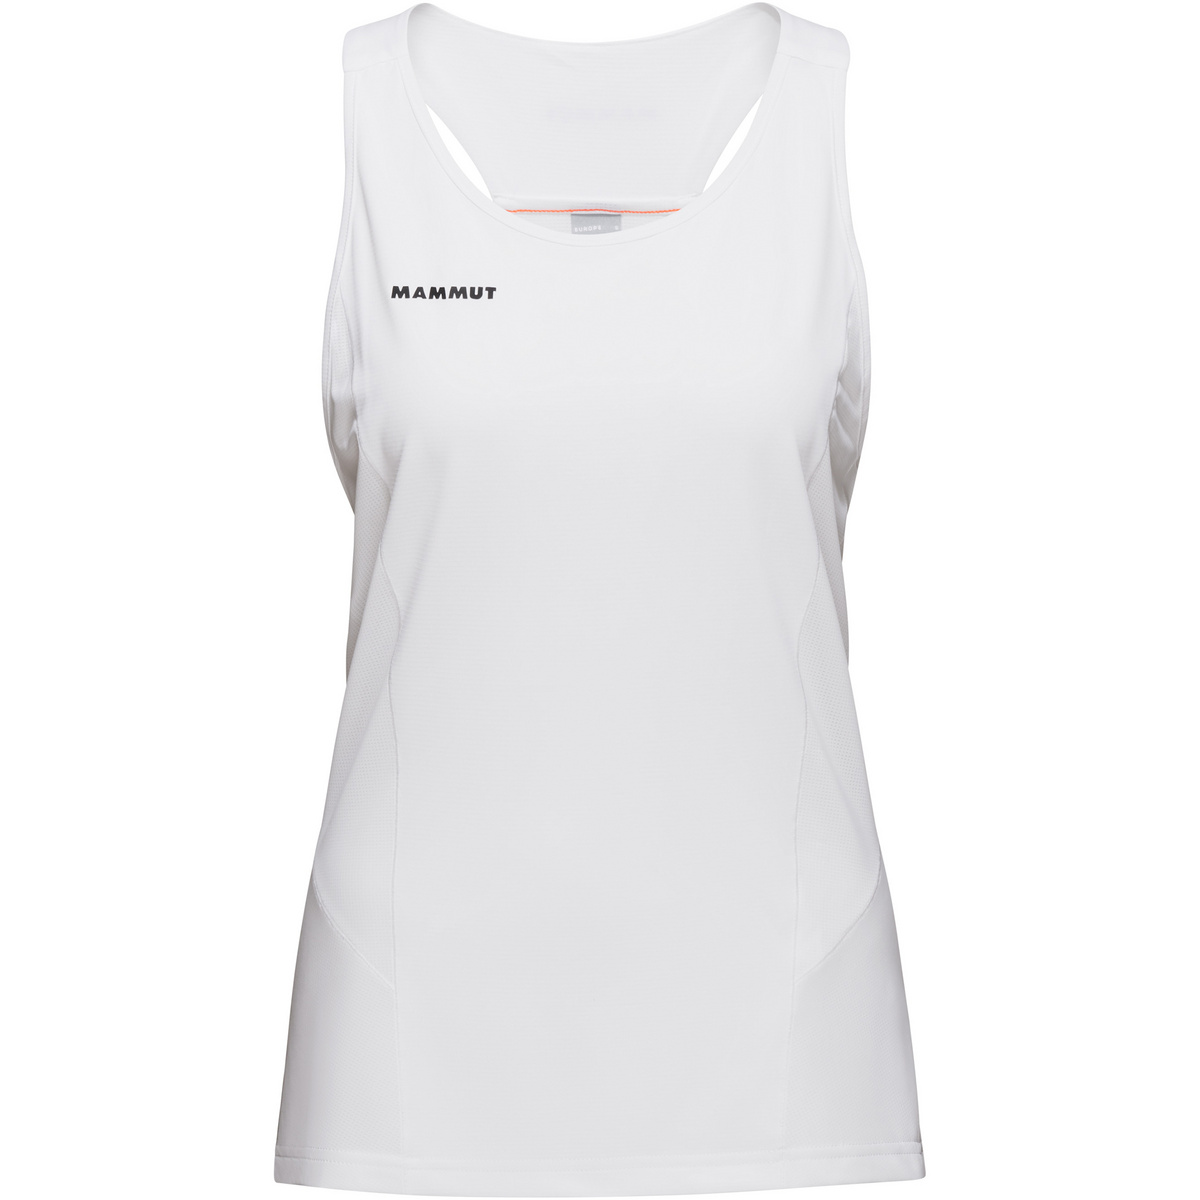 Image of Mammut Donna Top Aenergy Fl